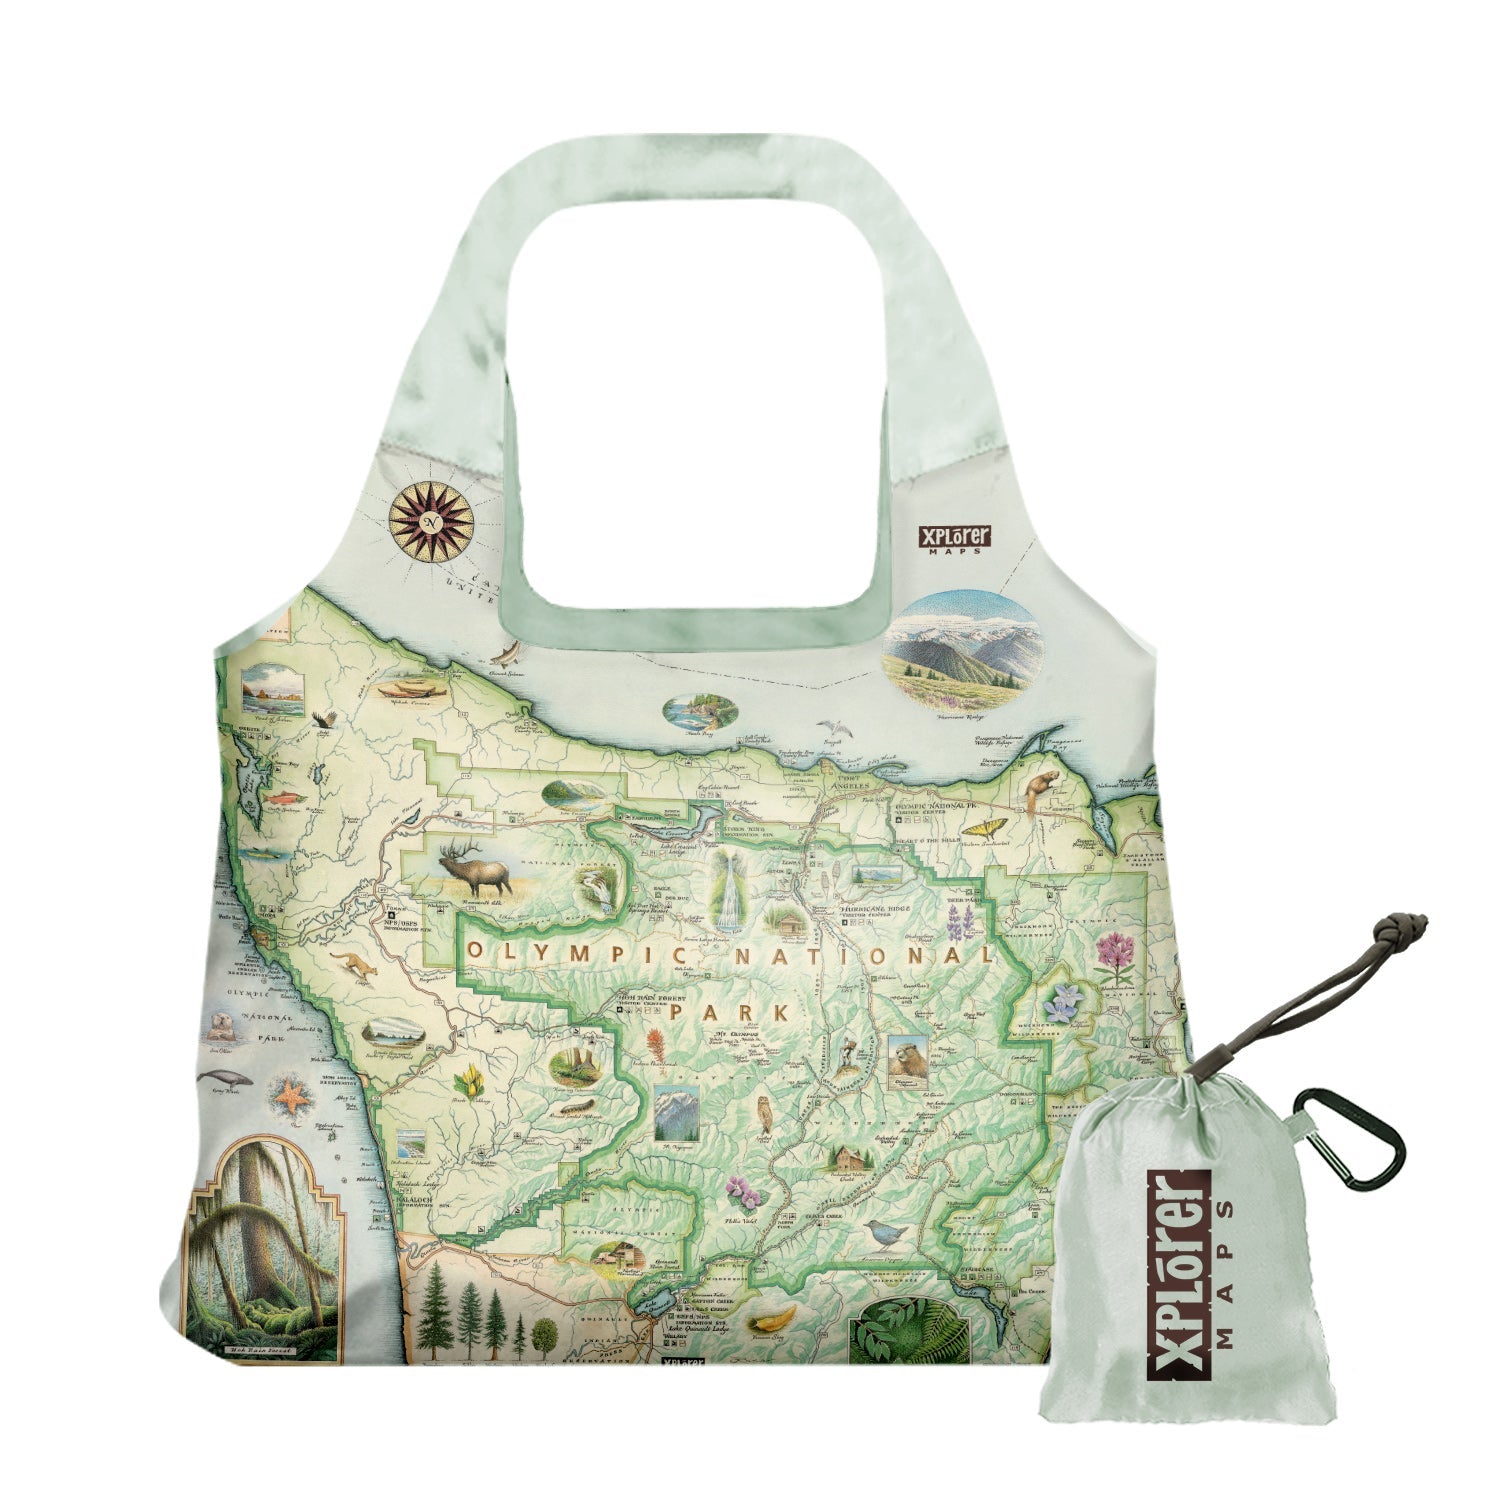 Olympic National Park Map Canvas Tote Bags by  Xplorer Maps. The map features illustrations of the park such as Enchanted Valley Chalet, Sol Duc Hot Springs Resort, Hurricane Ridge Visitor Center, and Kalaloch Lodge. Flora and fauna include sea otters, Roosevelt elk, Chinook salmon, skunk cabbage, and Flett's Violet.